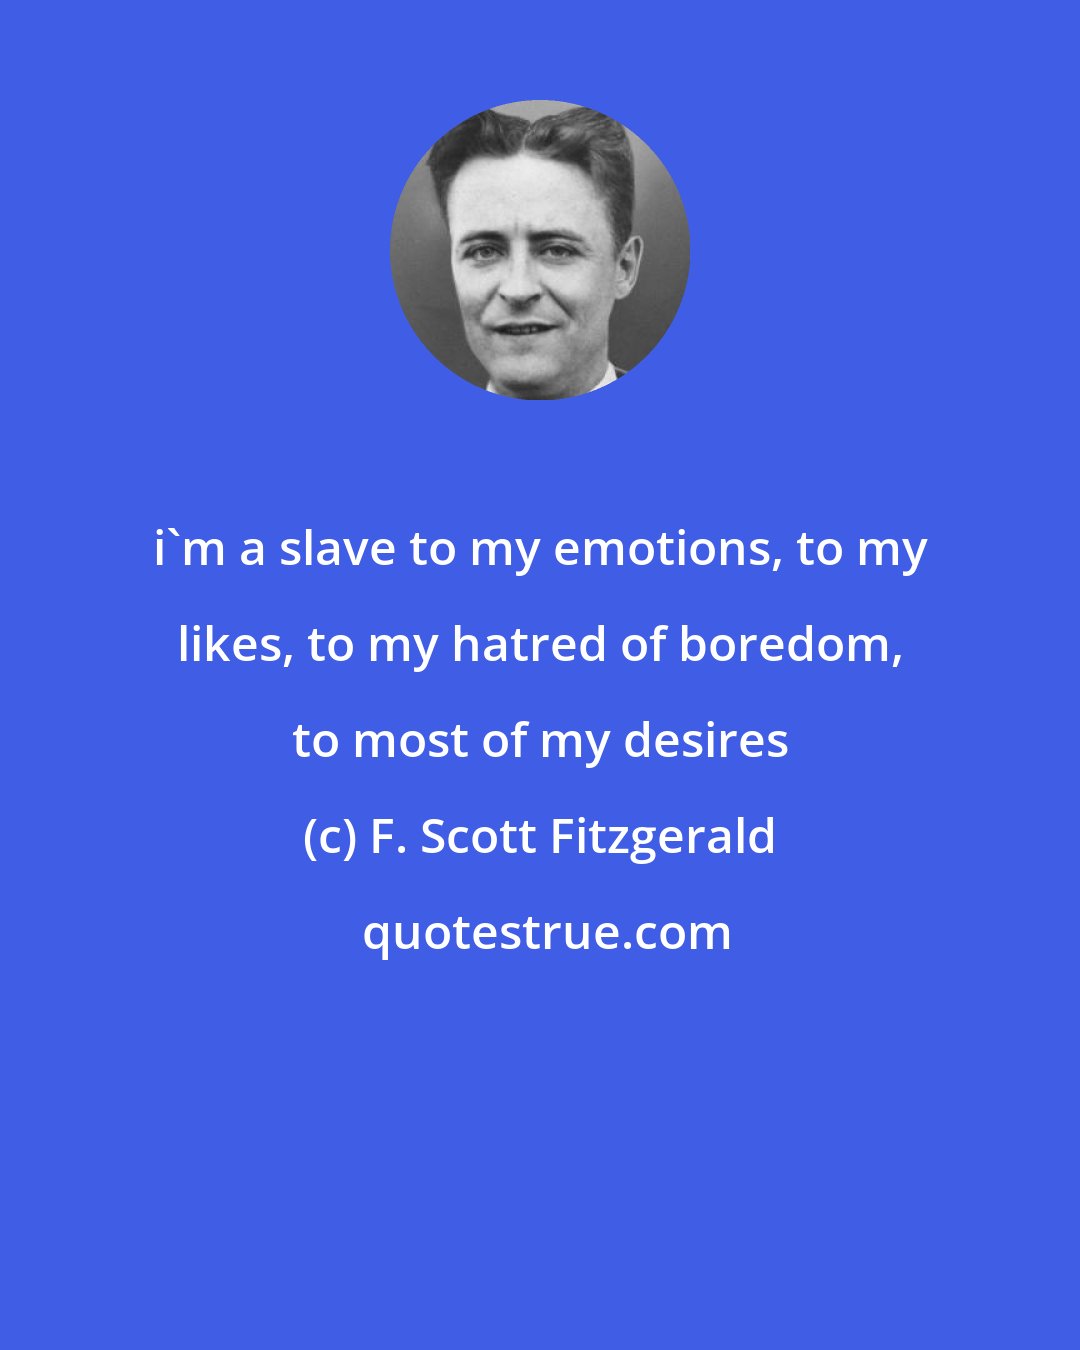 F. Scott Fitzgerald: i'm a slave to my emotions, to my likes, to my hatred of boredom, to most of my desires